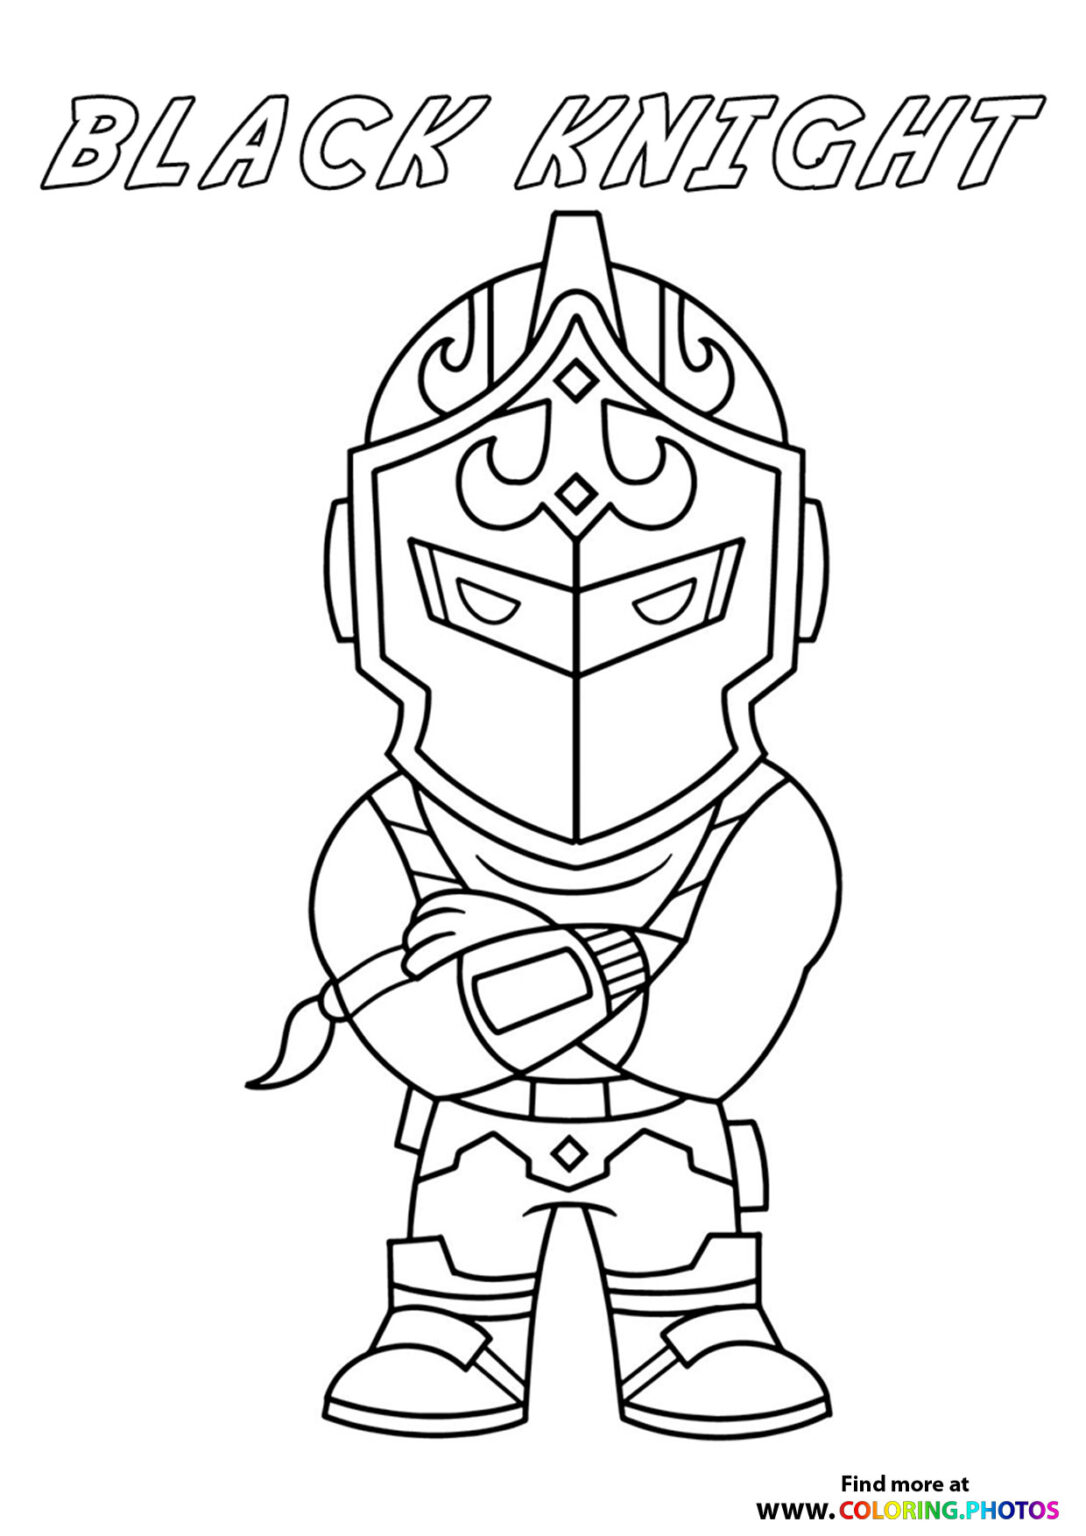 Pelly - Fortnite - Coloring Pages for kids